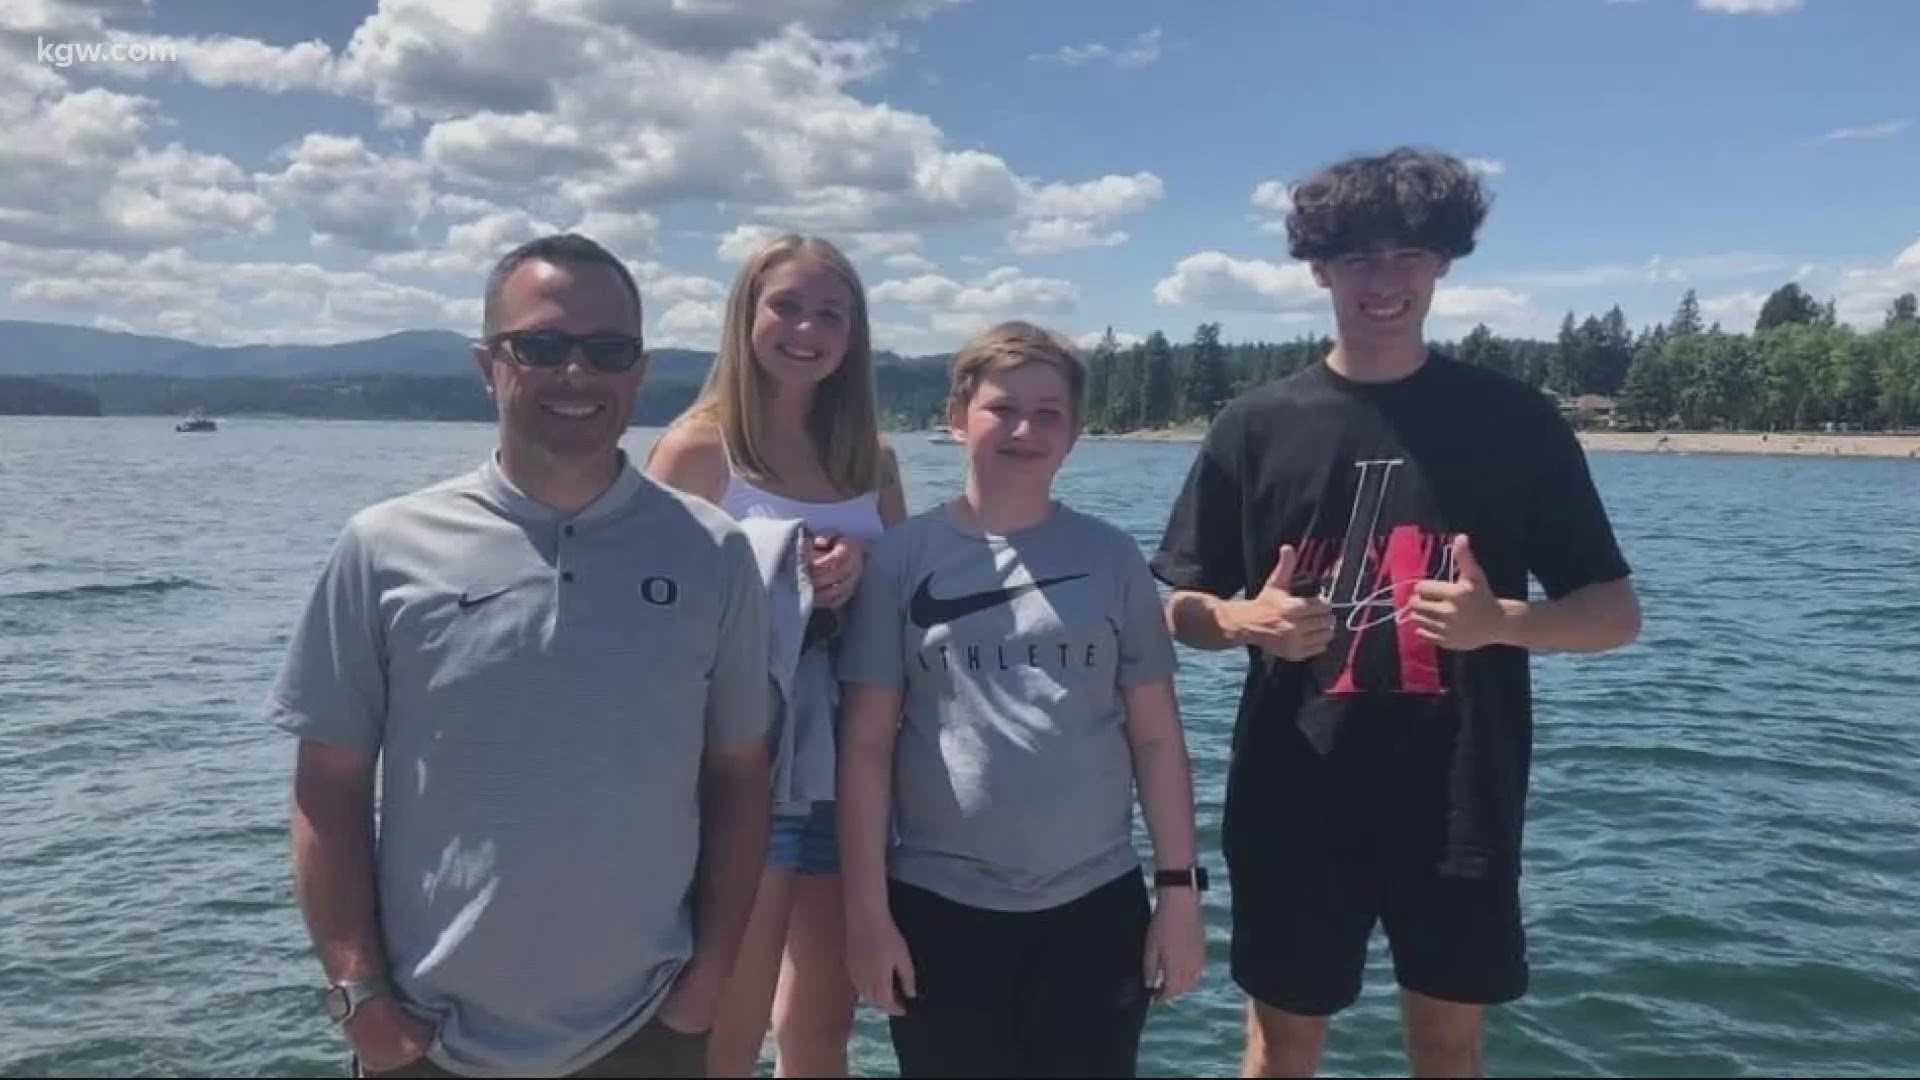 Two Lake Oswego families are in mourning after a fatal float plane crash in Idaho. Three of the victims were just teenagers.